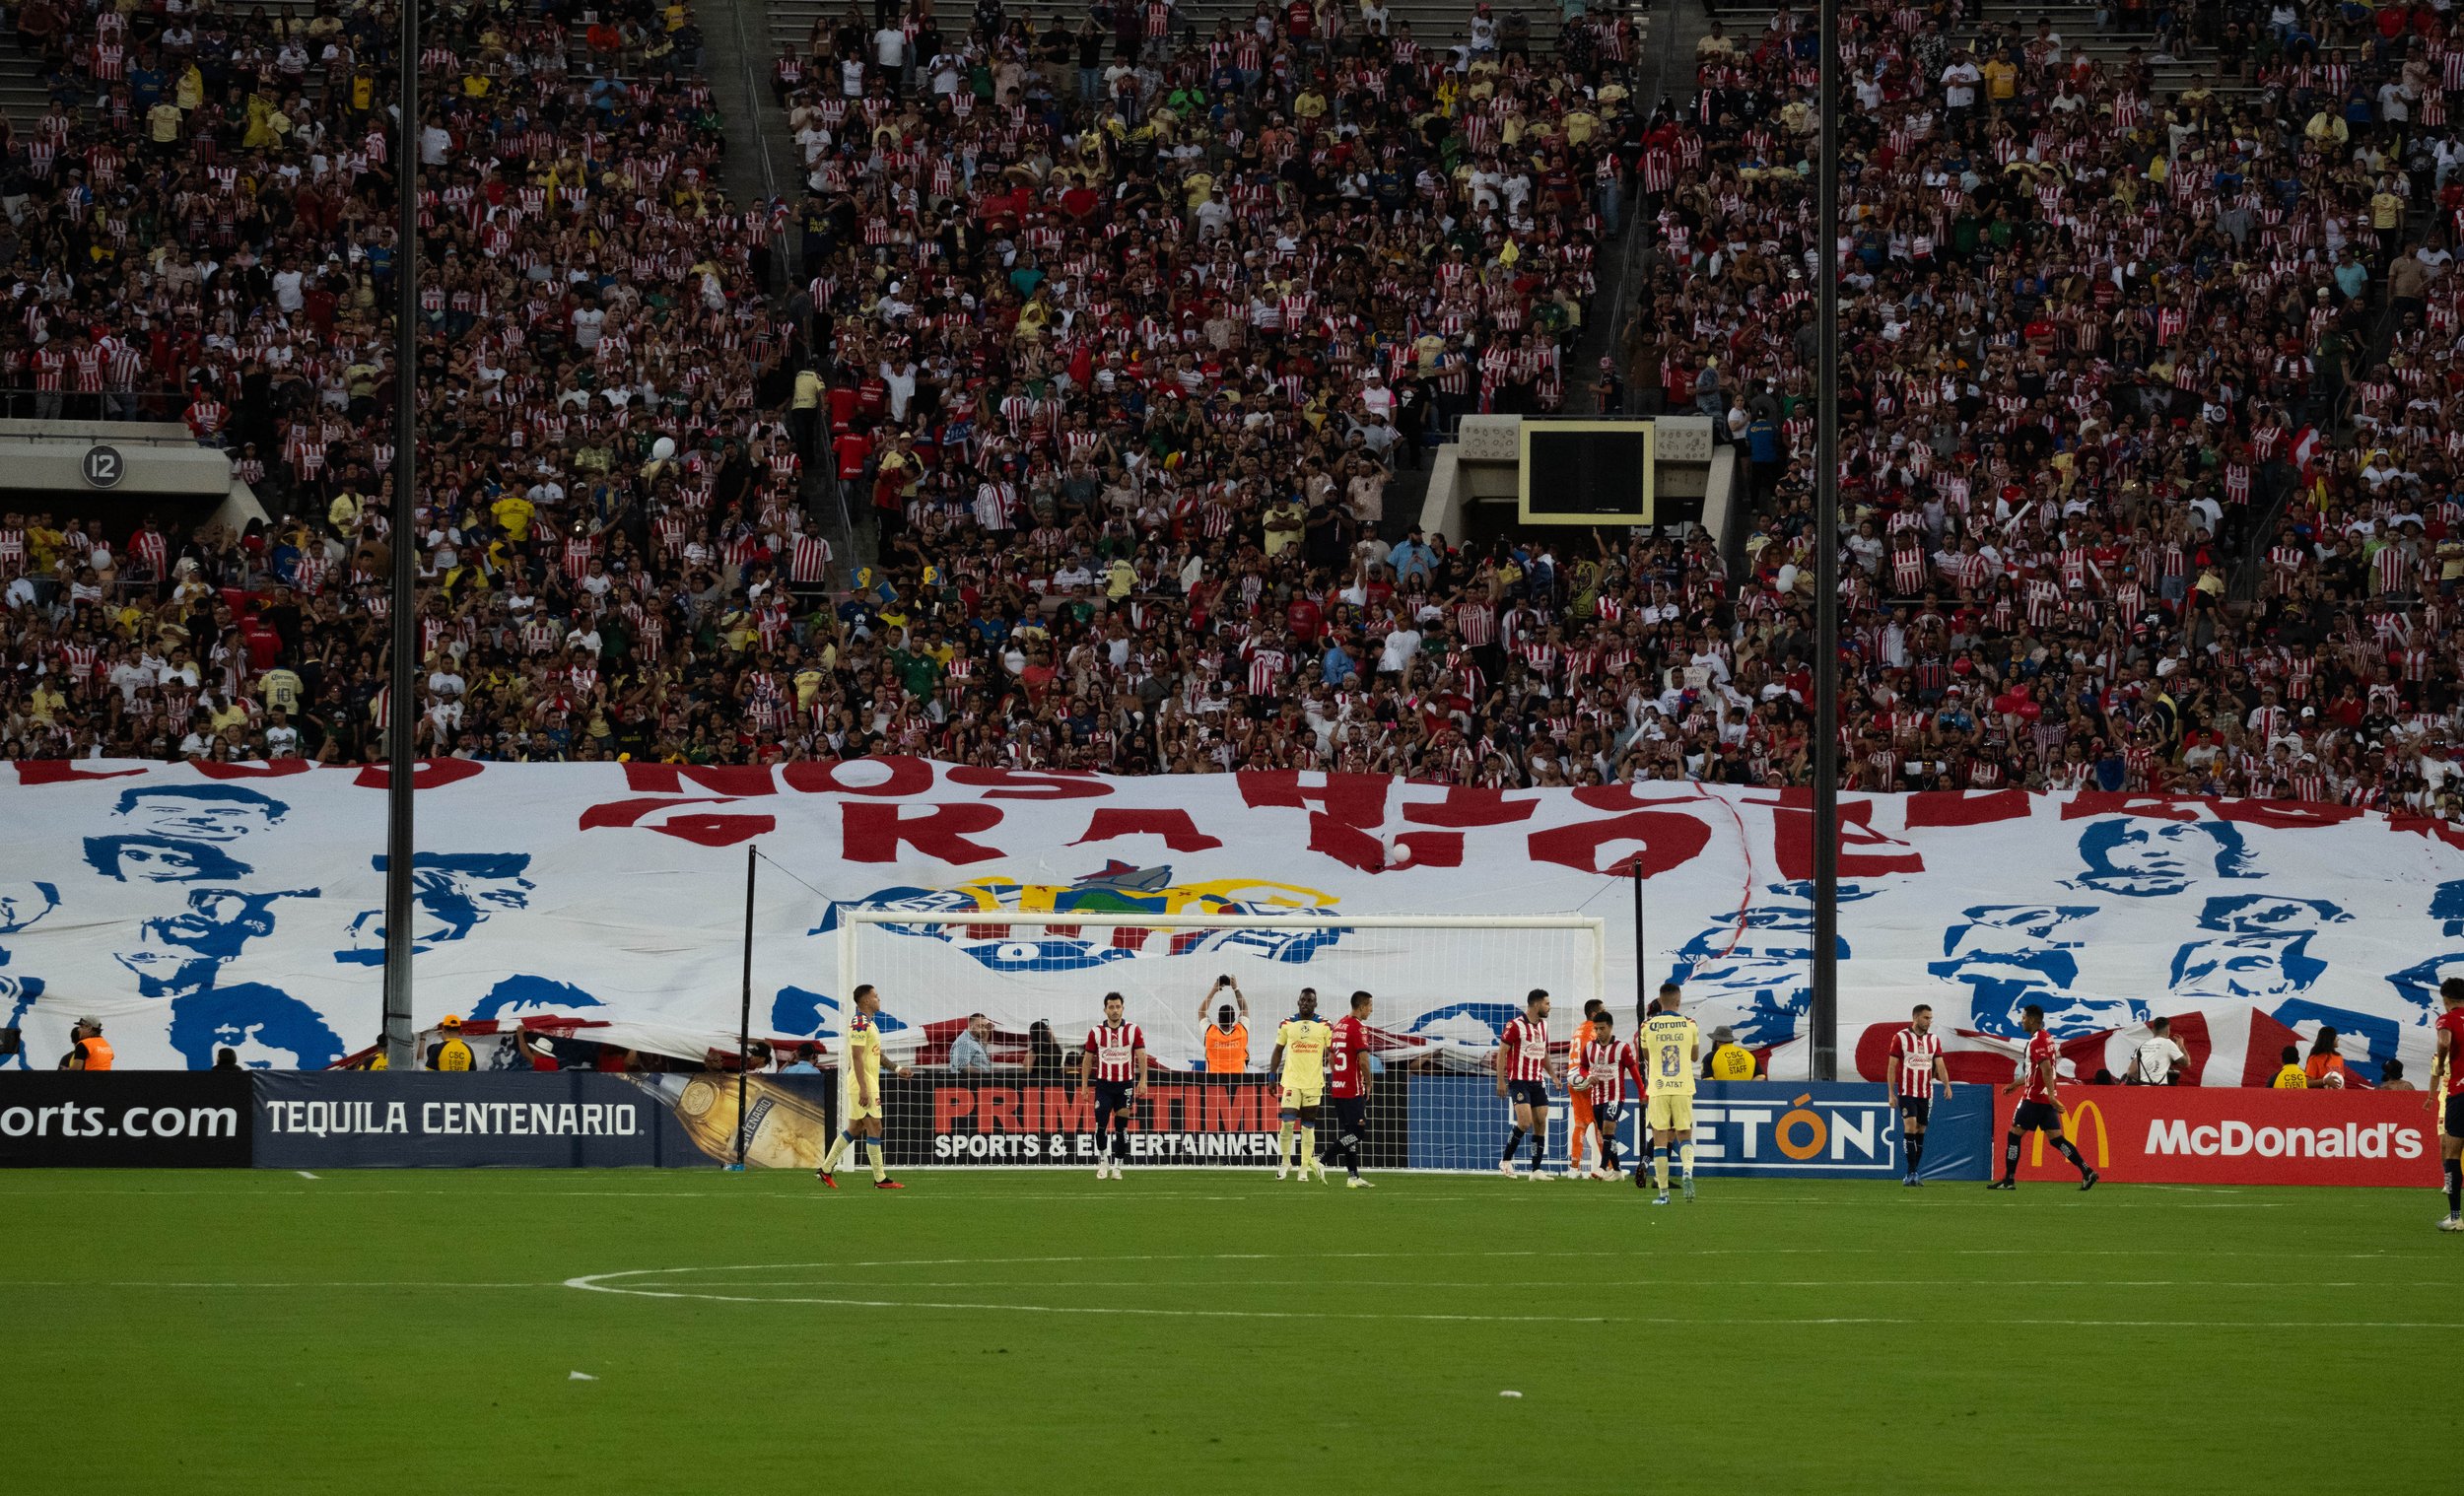  C.D. Guadalajara(Chivas) fans displaying a banner of the Chivas banner at the Rose Bowl in Pasadena, Calif. on Sunday, Oct. 15. (Danilo Perez | The Corsair) 